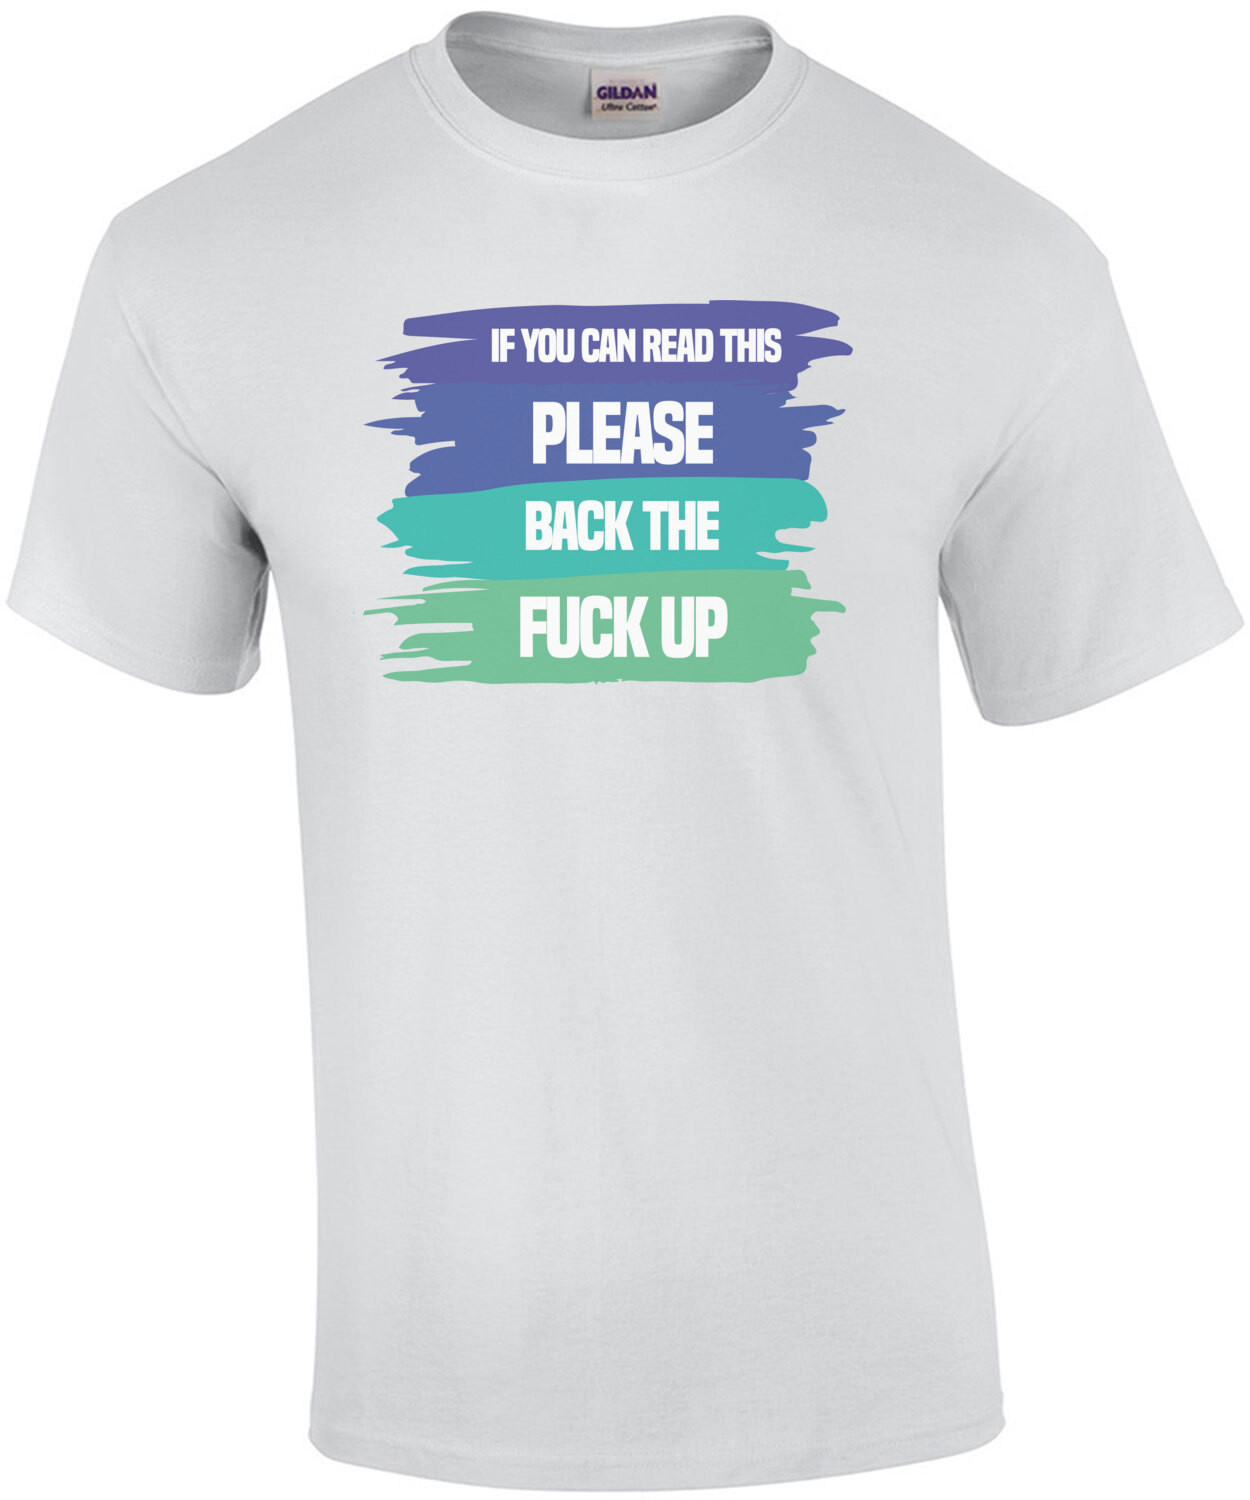 If you can read this please back the fuck up - funny insult t-shirt